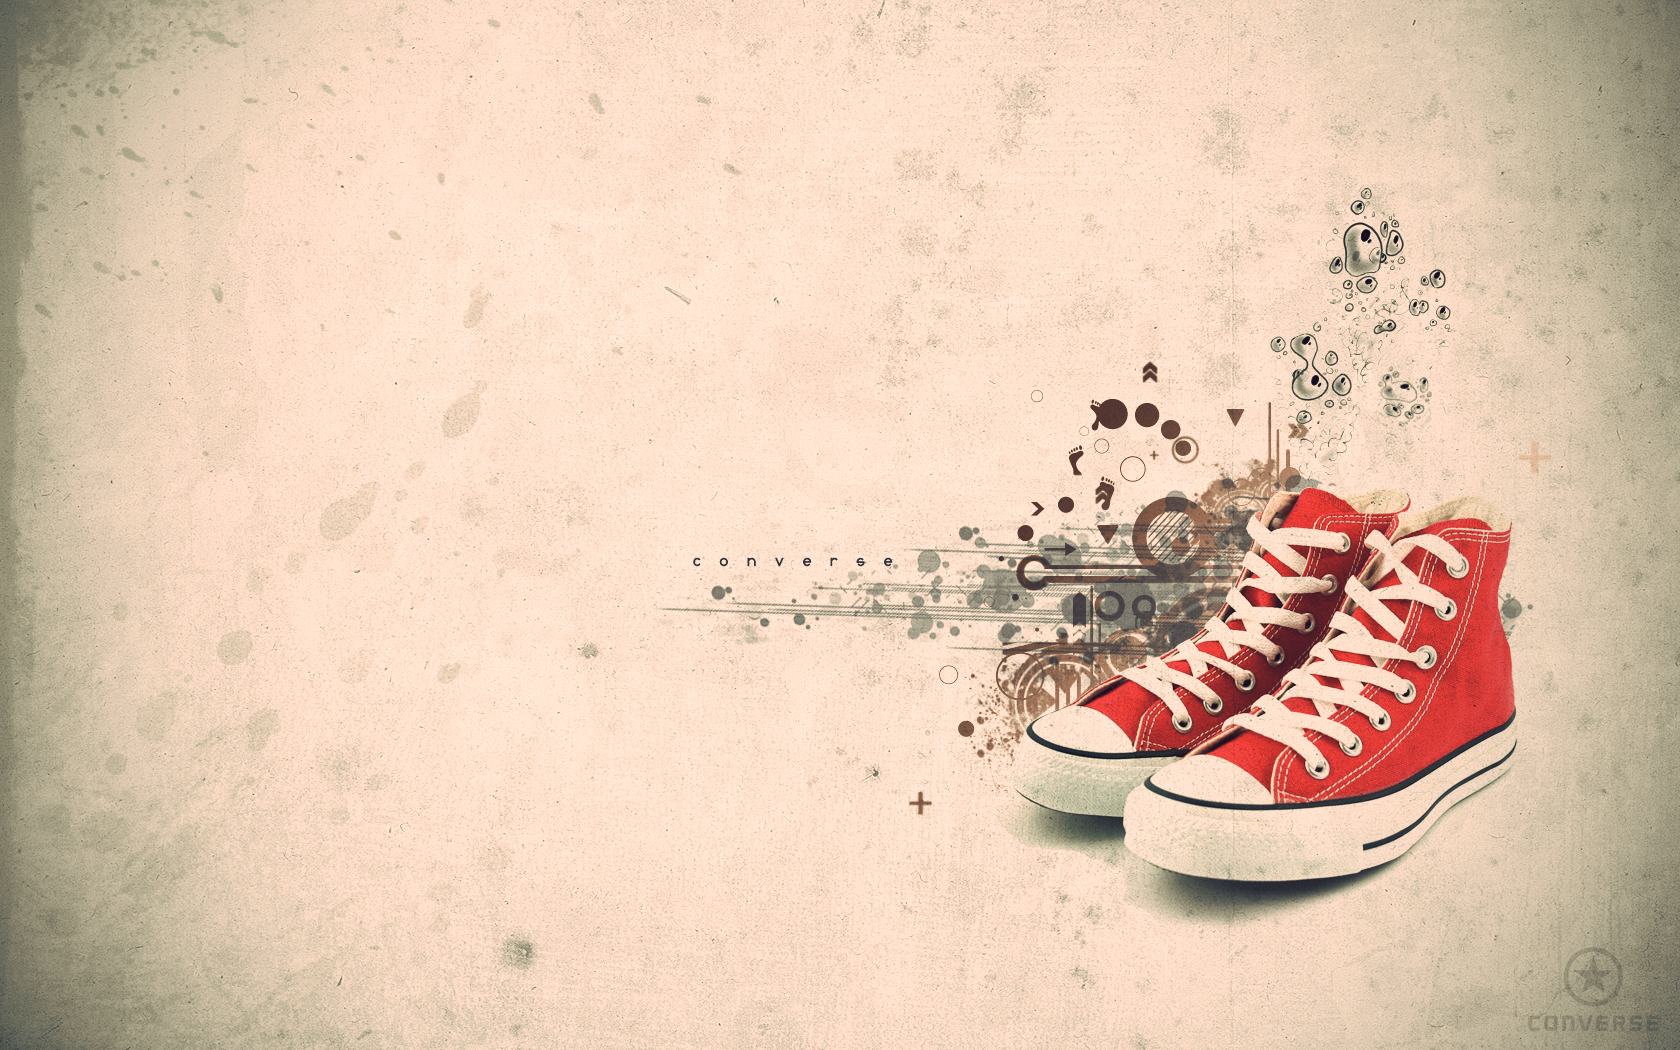 Recent Converse Background Image G Sfdcy